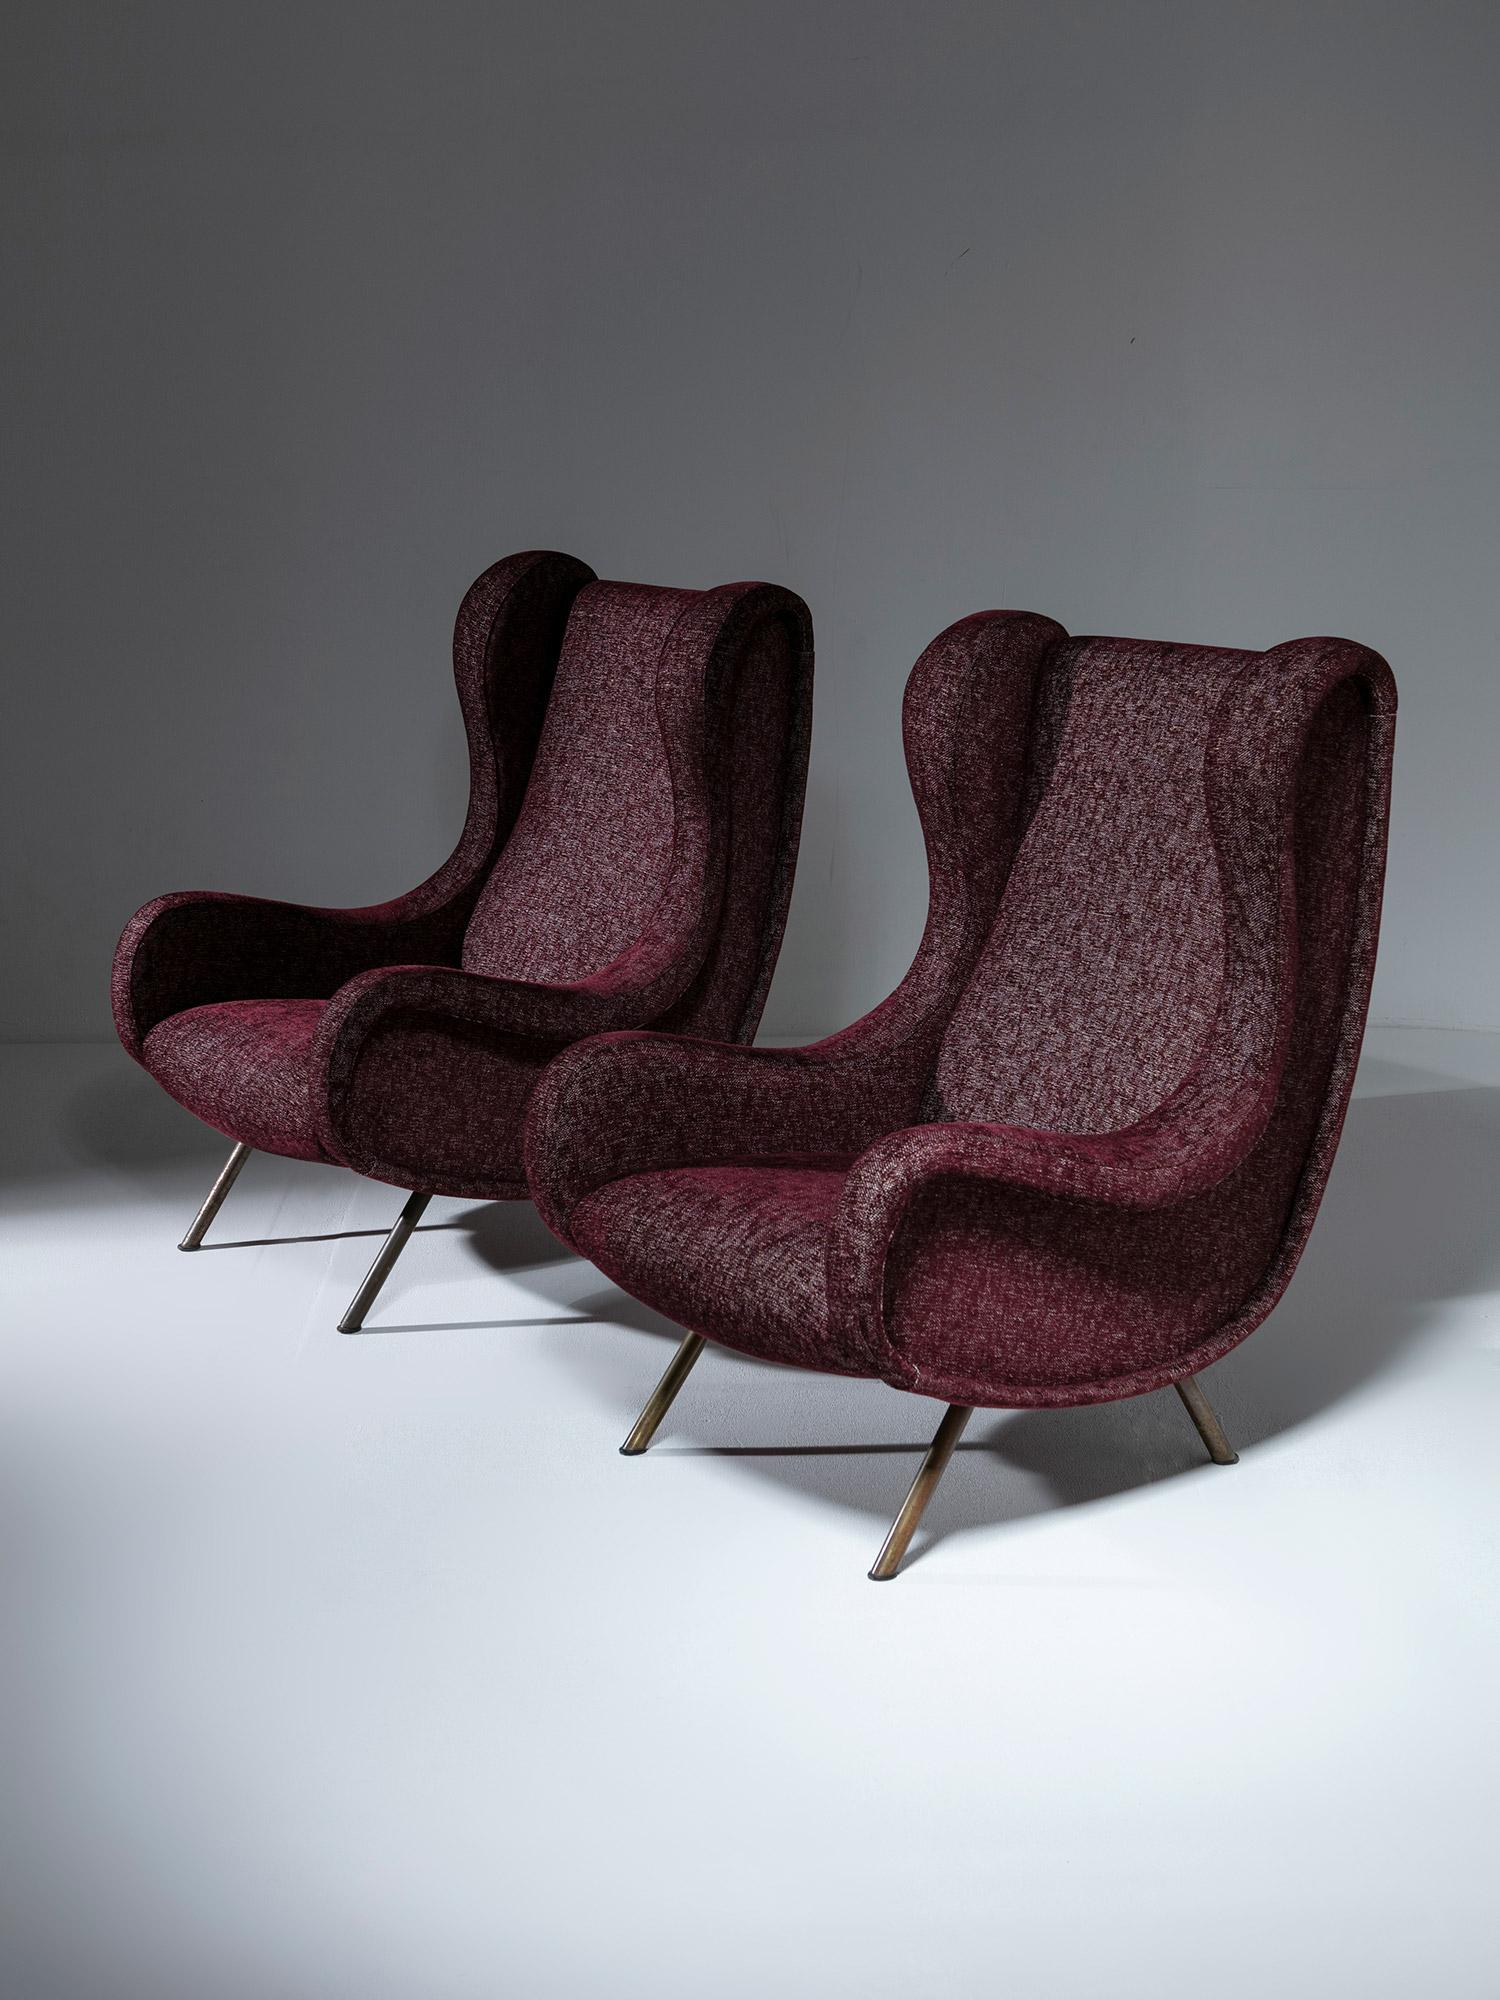 Set of two Senior armchairs by Marco Zanuso for Arflex.